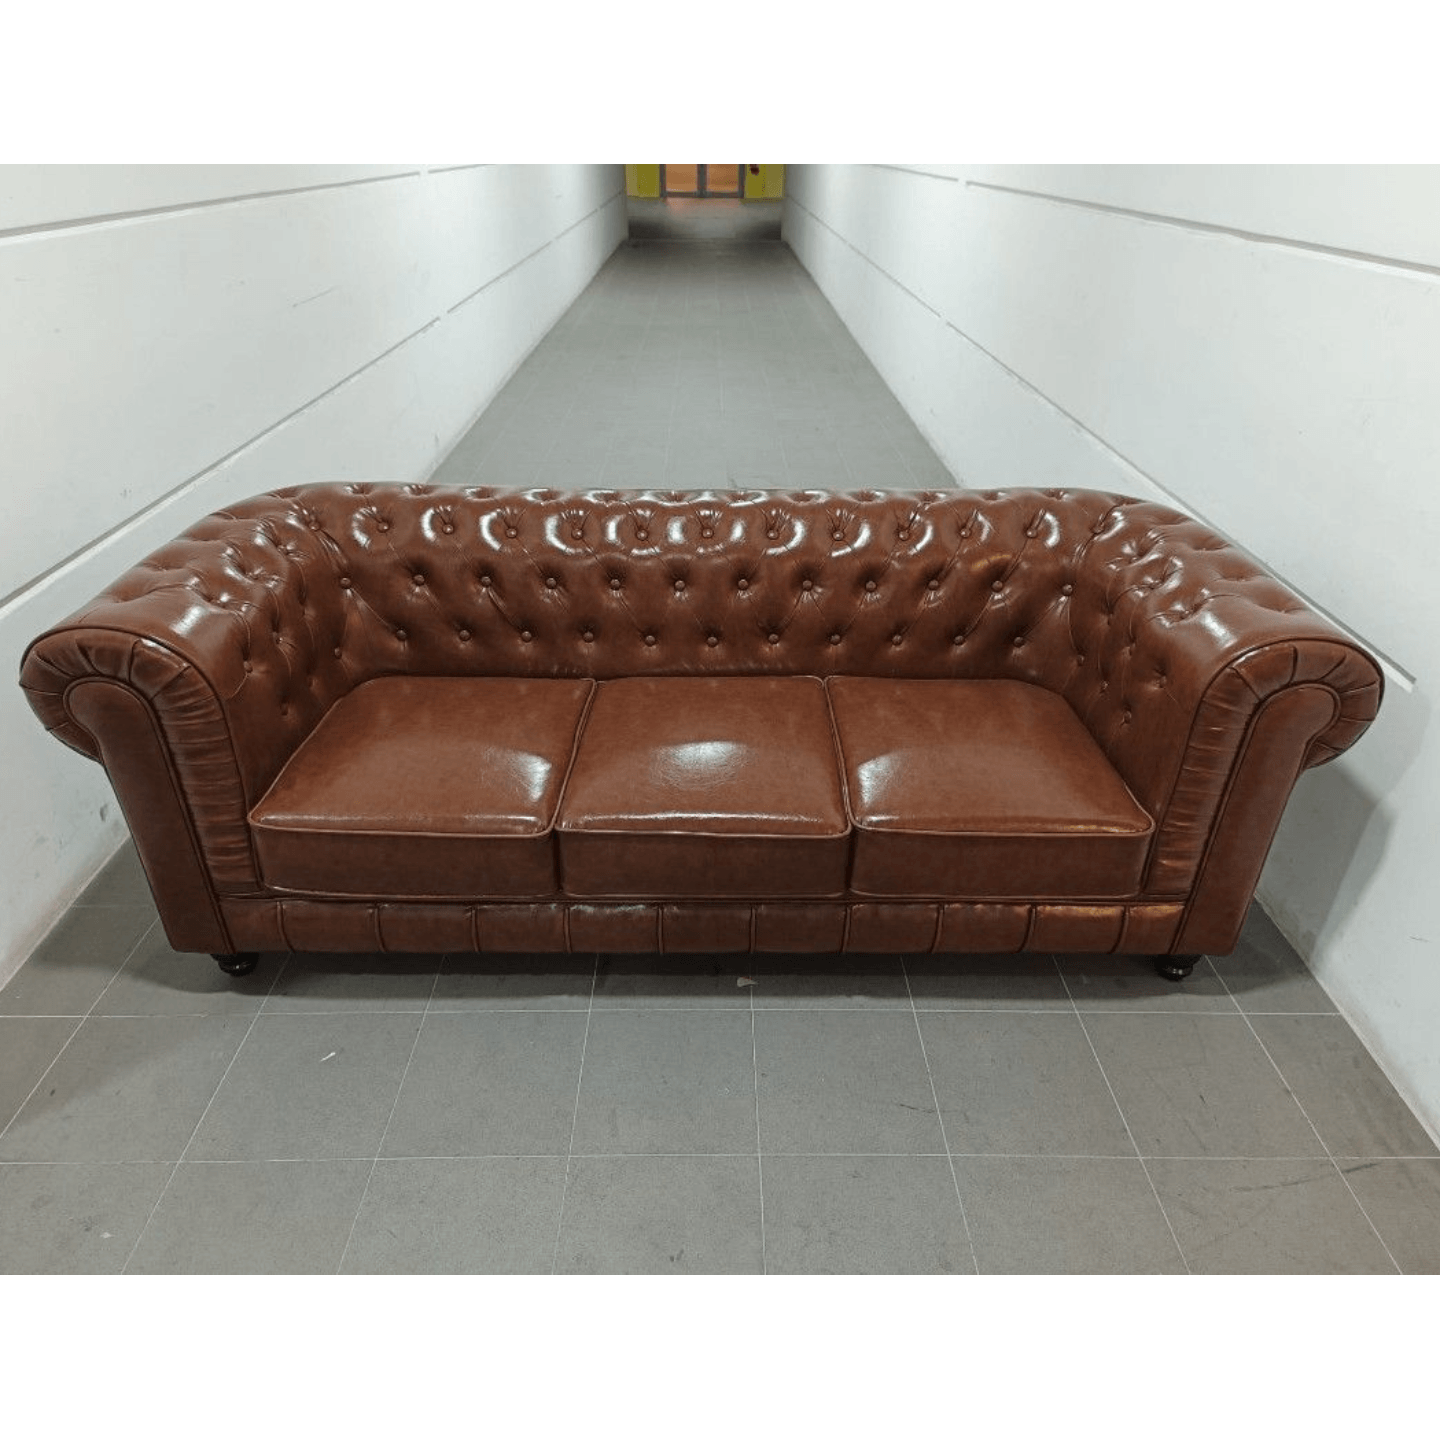 SALVADO II 3 Seater Chesterfield Sofa in CAMEL BROWN PU